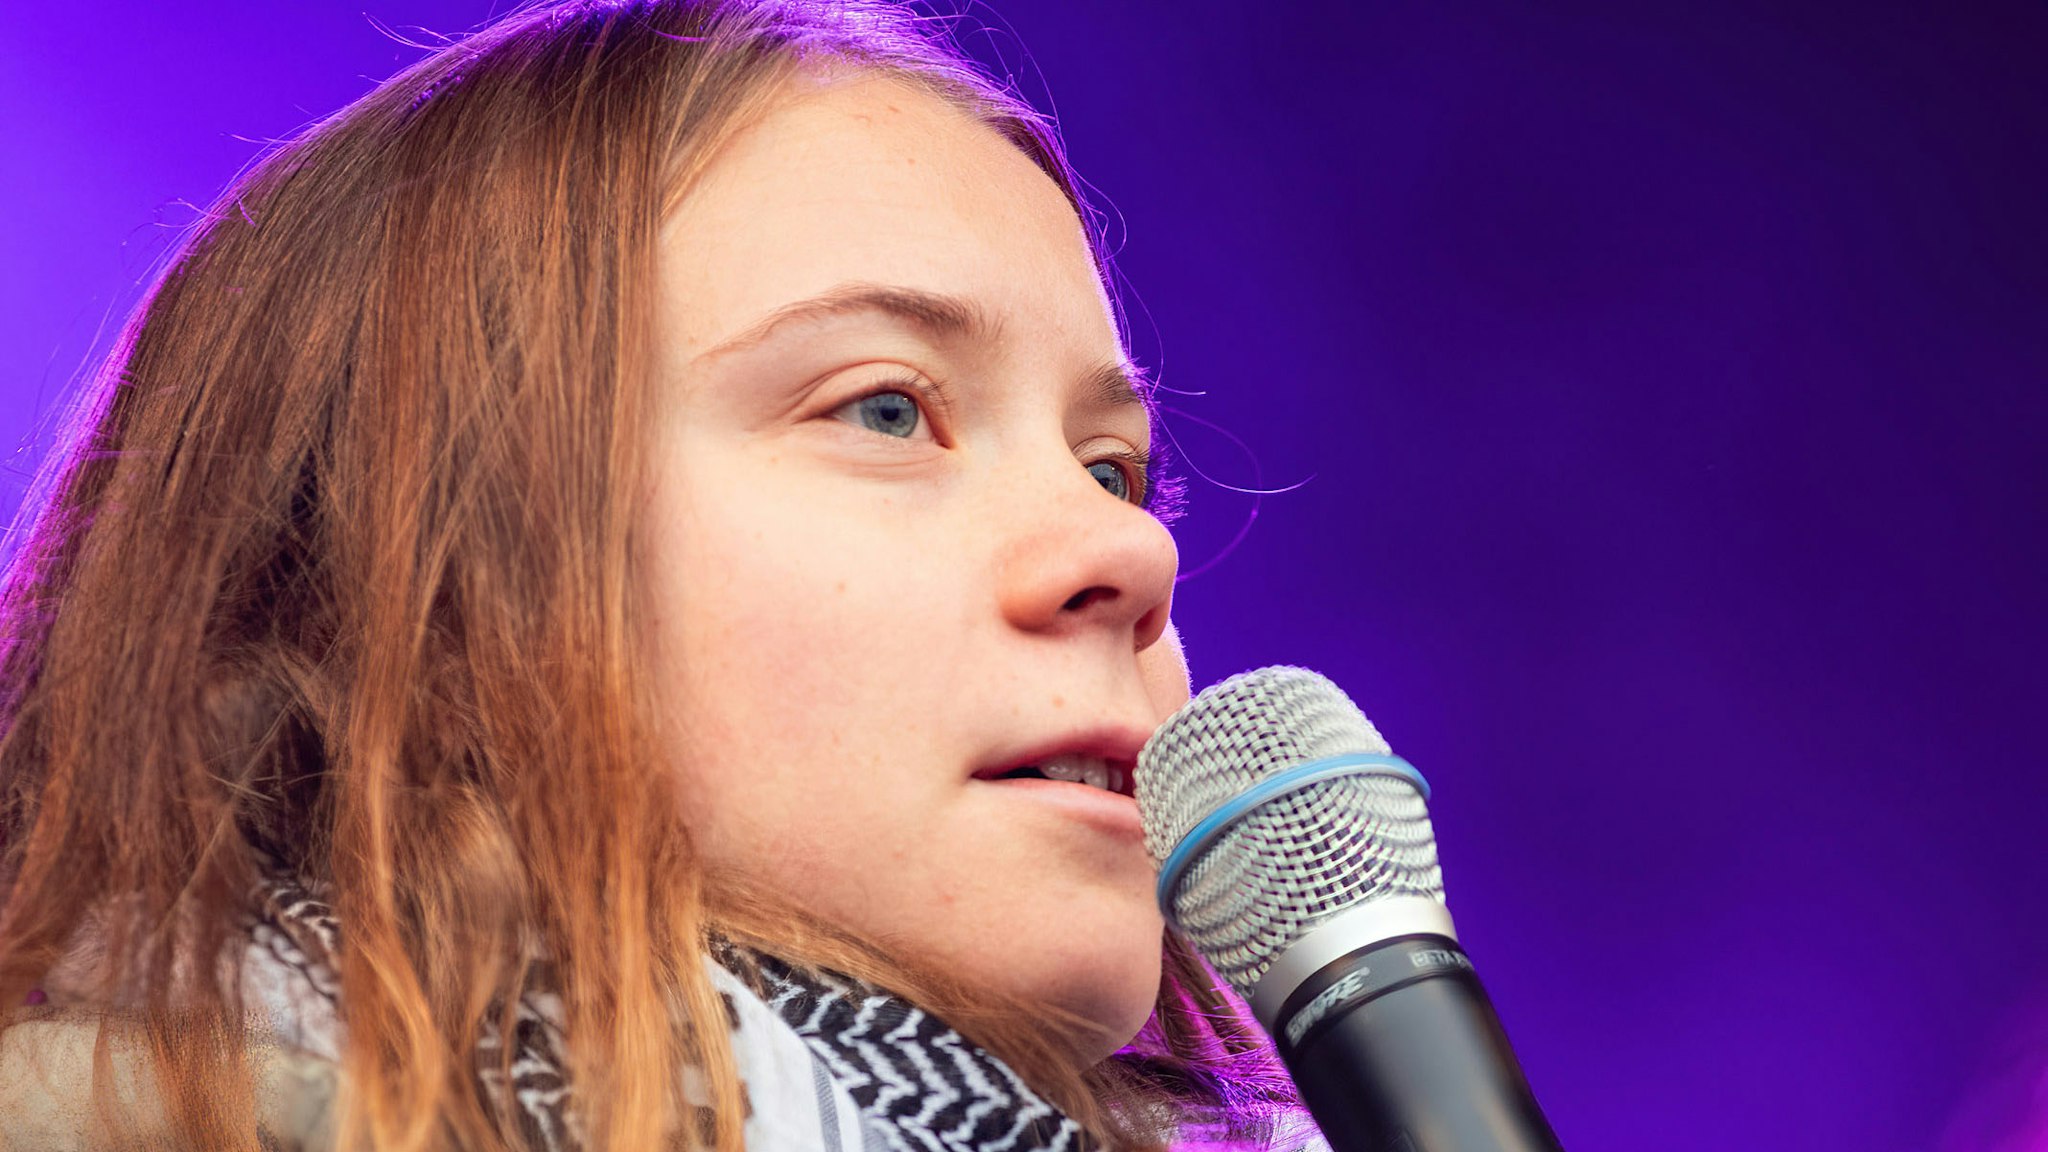 AMSTERDAM, NETHERLANDS - 2023/11/12: Greta Thunberg seen on stage during the demonstration. An estimated 85,000 demonstrators took part in a peaceful climate march with no arrests. This surpassed the climate demonstration of two-years-ago which had 45,000 participants. The demonstrators walked a route from Dam Square to the Museumplein. On their route they joined a large pro-Palestinian march. Among the marchers was Swedish climate activist Greta Thunberg, she later gave a short speech on the Museumplein. The march was organized by nine organizations, under the name Climate Crisis Coalition, this including Extinction Rebellion, Greenpeace, Oxfam Novib, and the trade union FNV. Also demonstrating was a feminist block, a children's block, an agricultural block, a vegan block, an anti-racism block and a block for sustainable fashion. The climate themes that were highlighted included the phasing out of Government fossil subsidies and a mandatory climate plan for polluting companies.